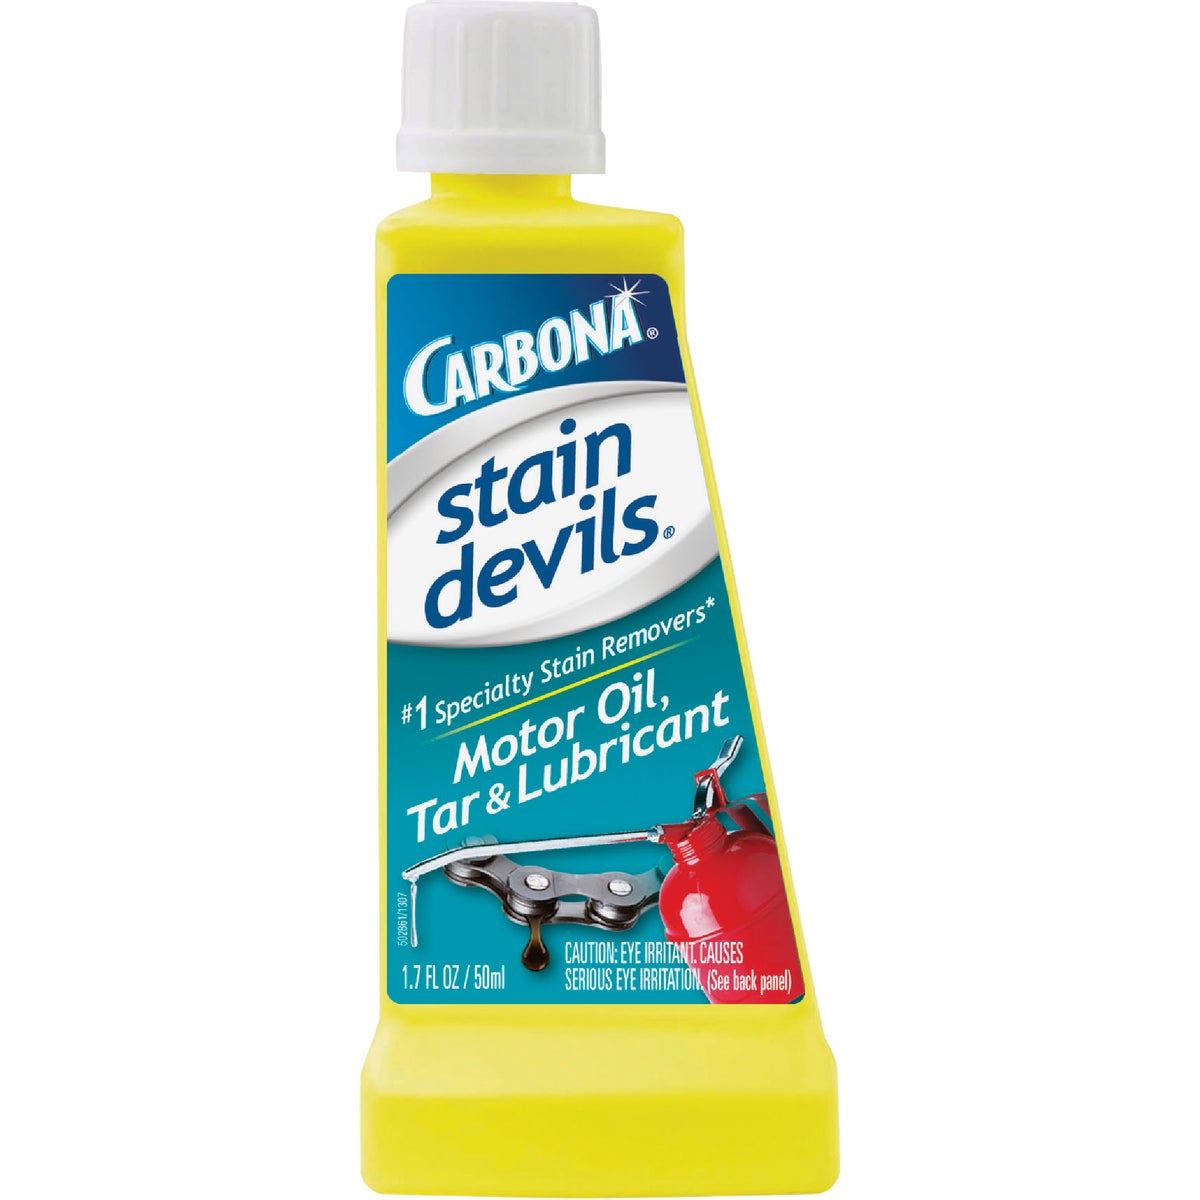 Carbona Stain Devils 1.7 Oz. Formula 7 Motor Oil, Tar & Lubricant Stain Remover